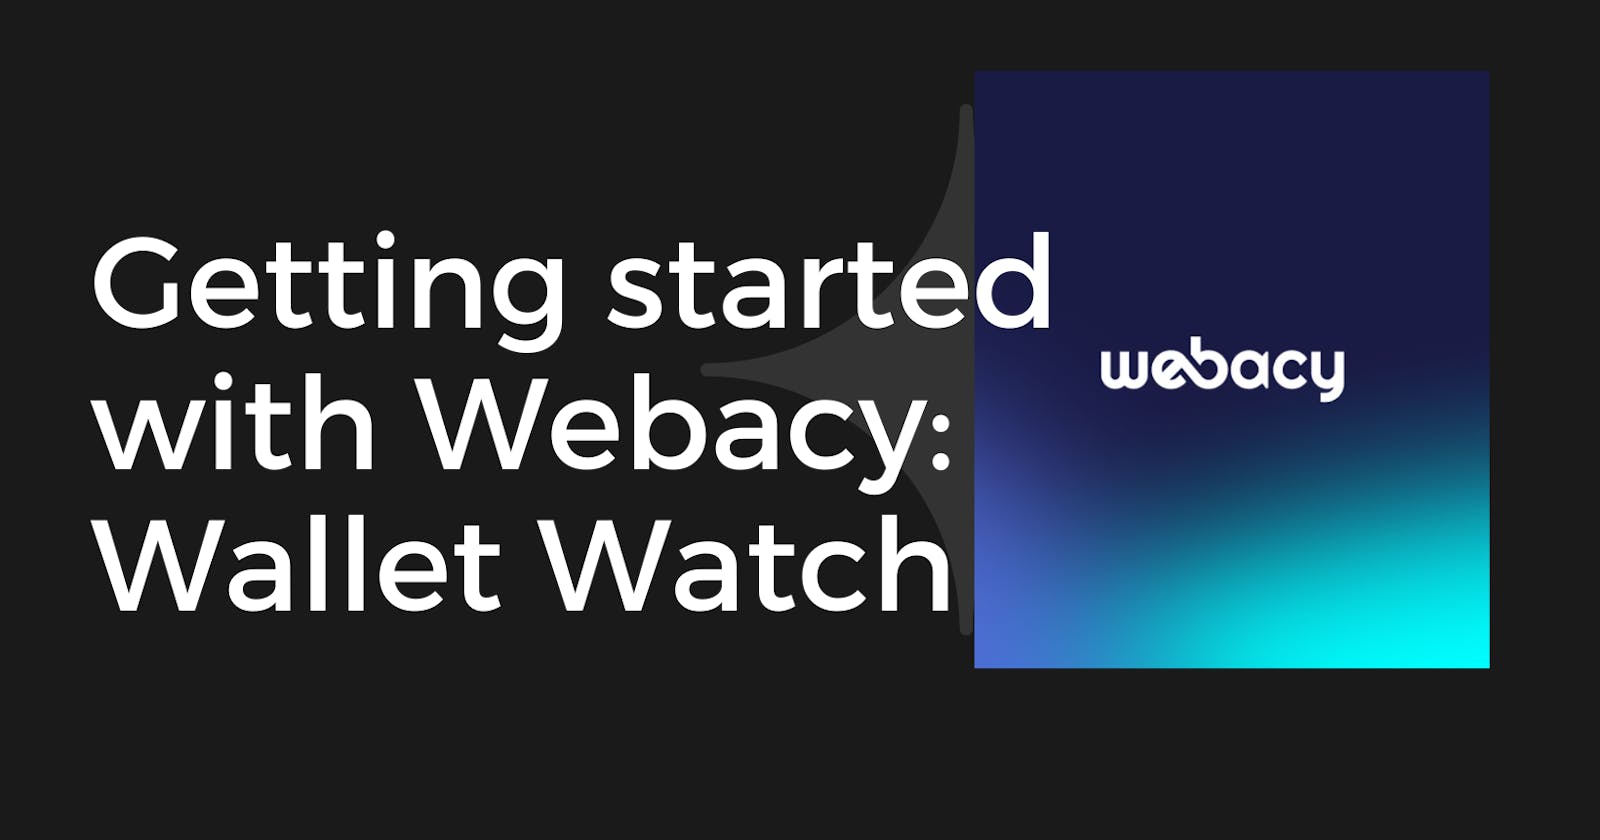 Getting started with Webacy: Wallet Watch